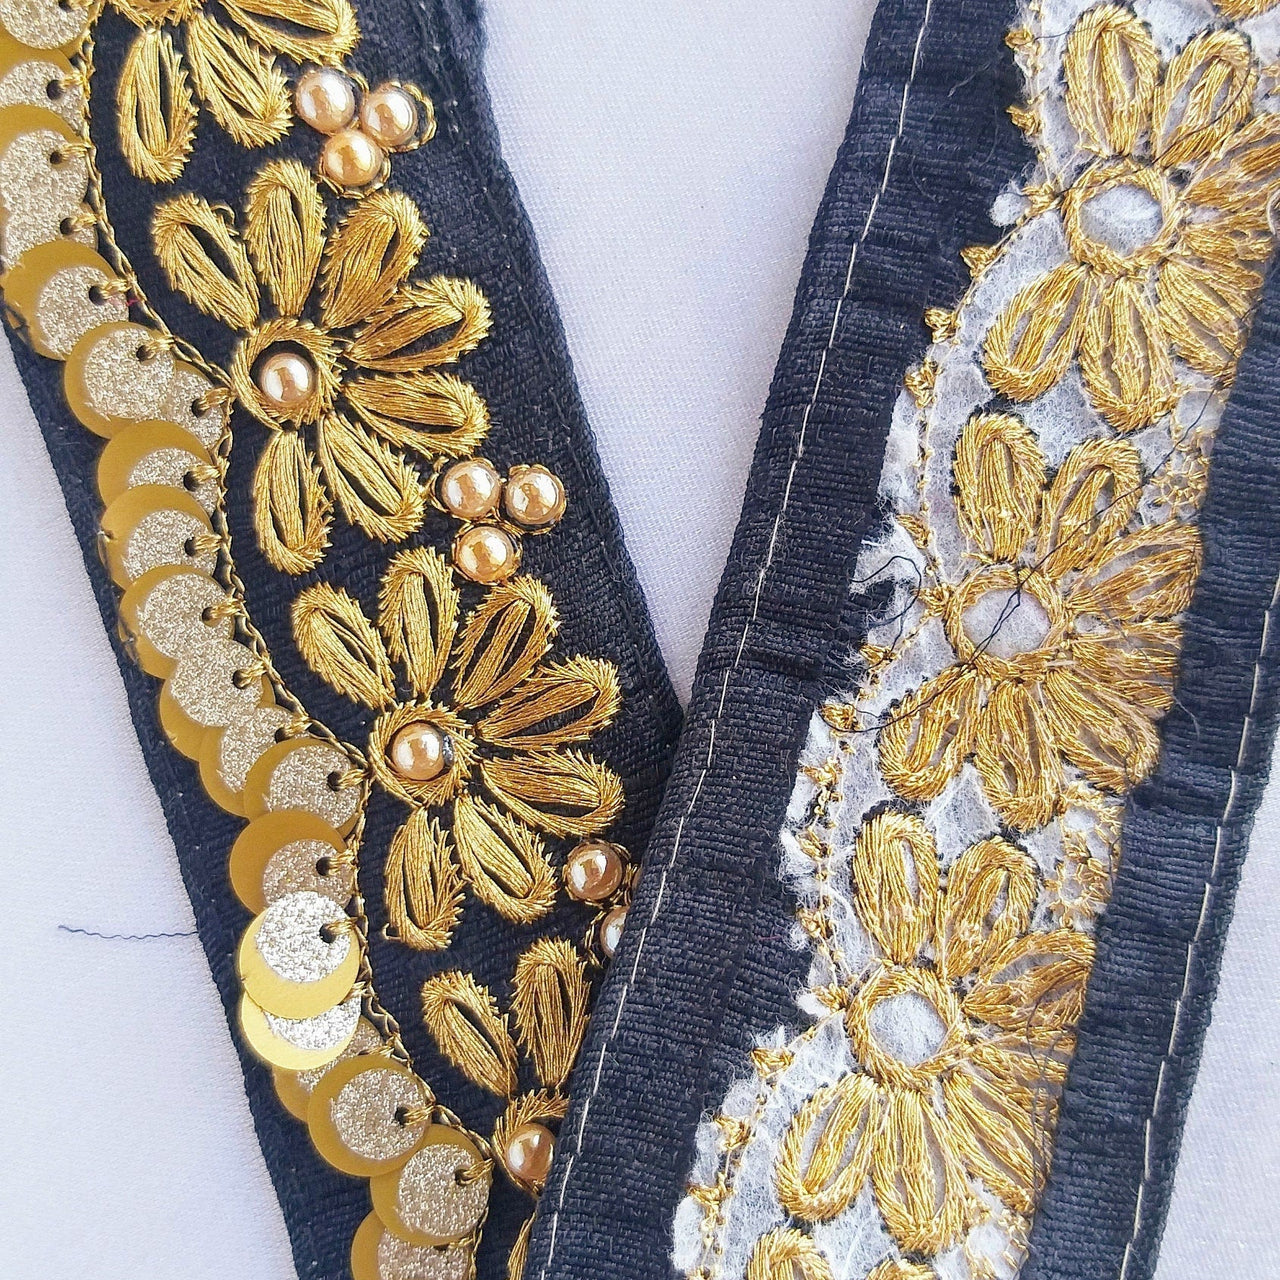 Indian Sari Trim, Black Art Silk Fabric With Gold Thread Embroidered Flowers Trim, Gold Sequins And Beads